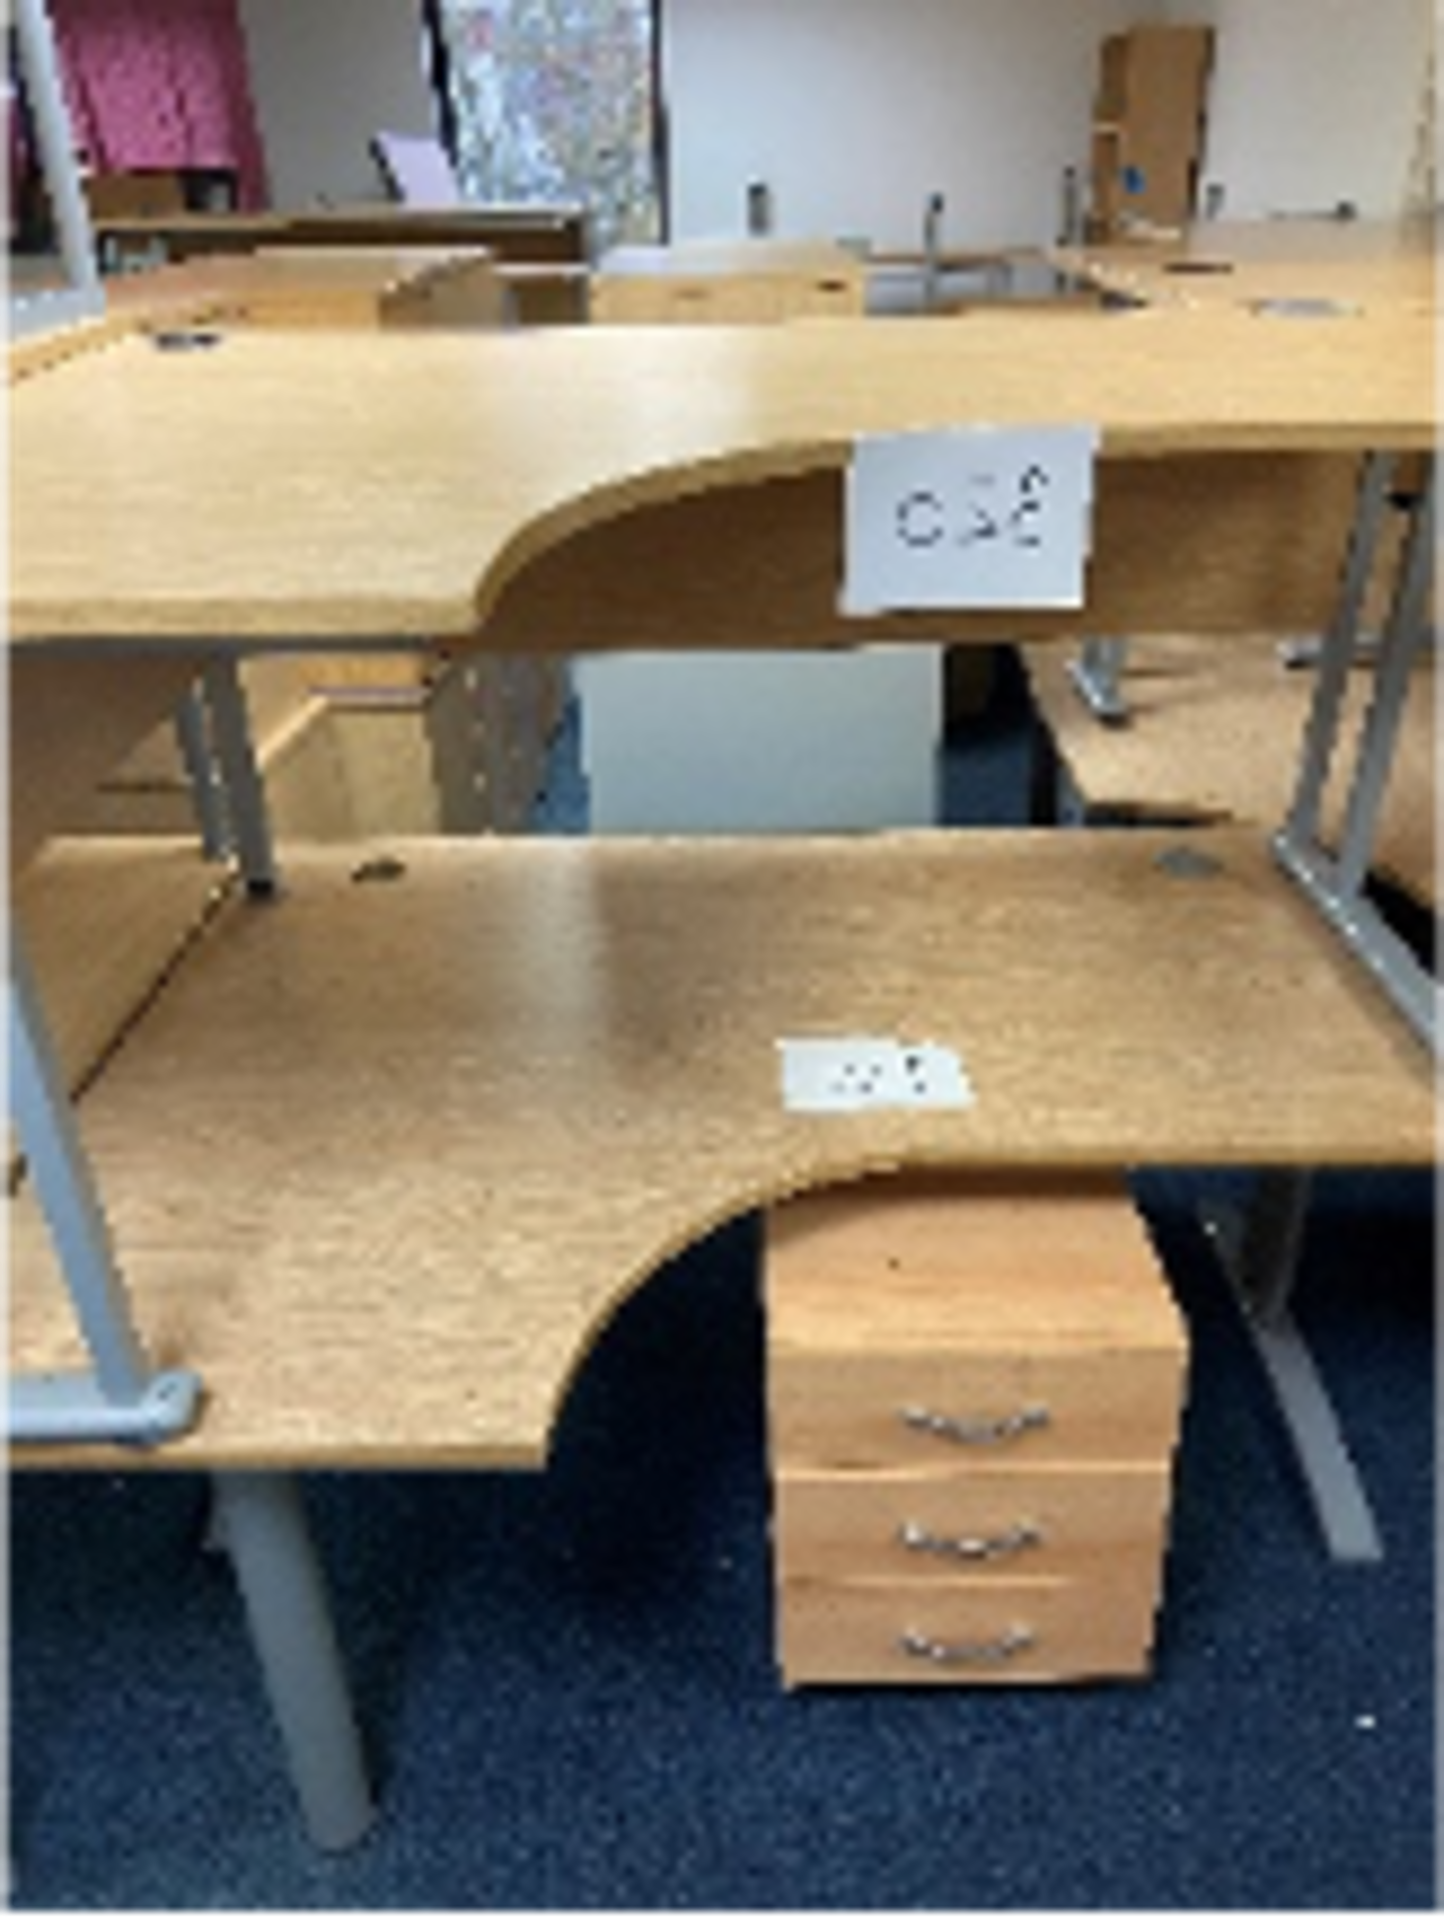 2 Office Desks And Chairs - Image 2 of 2